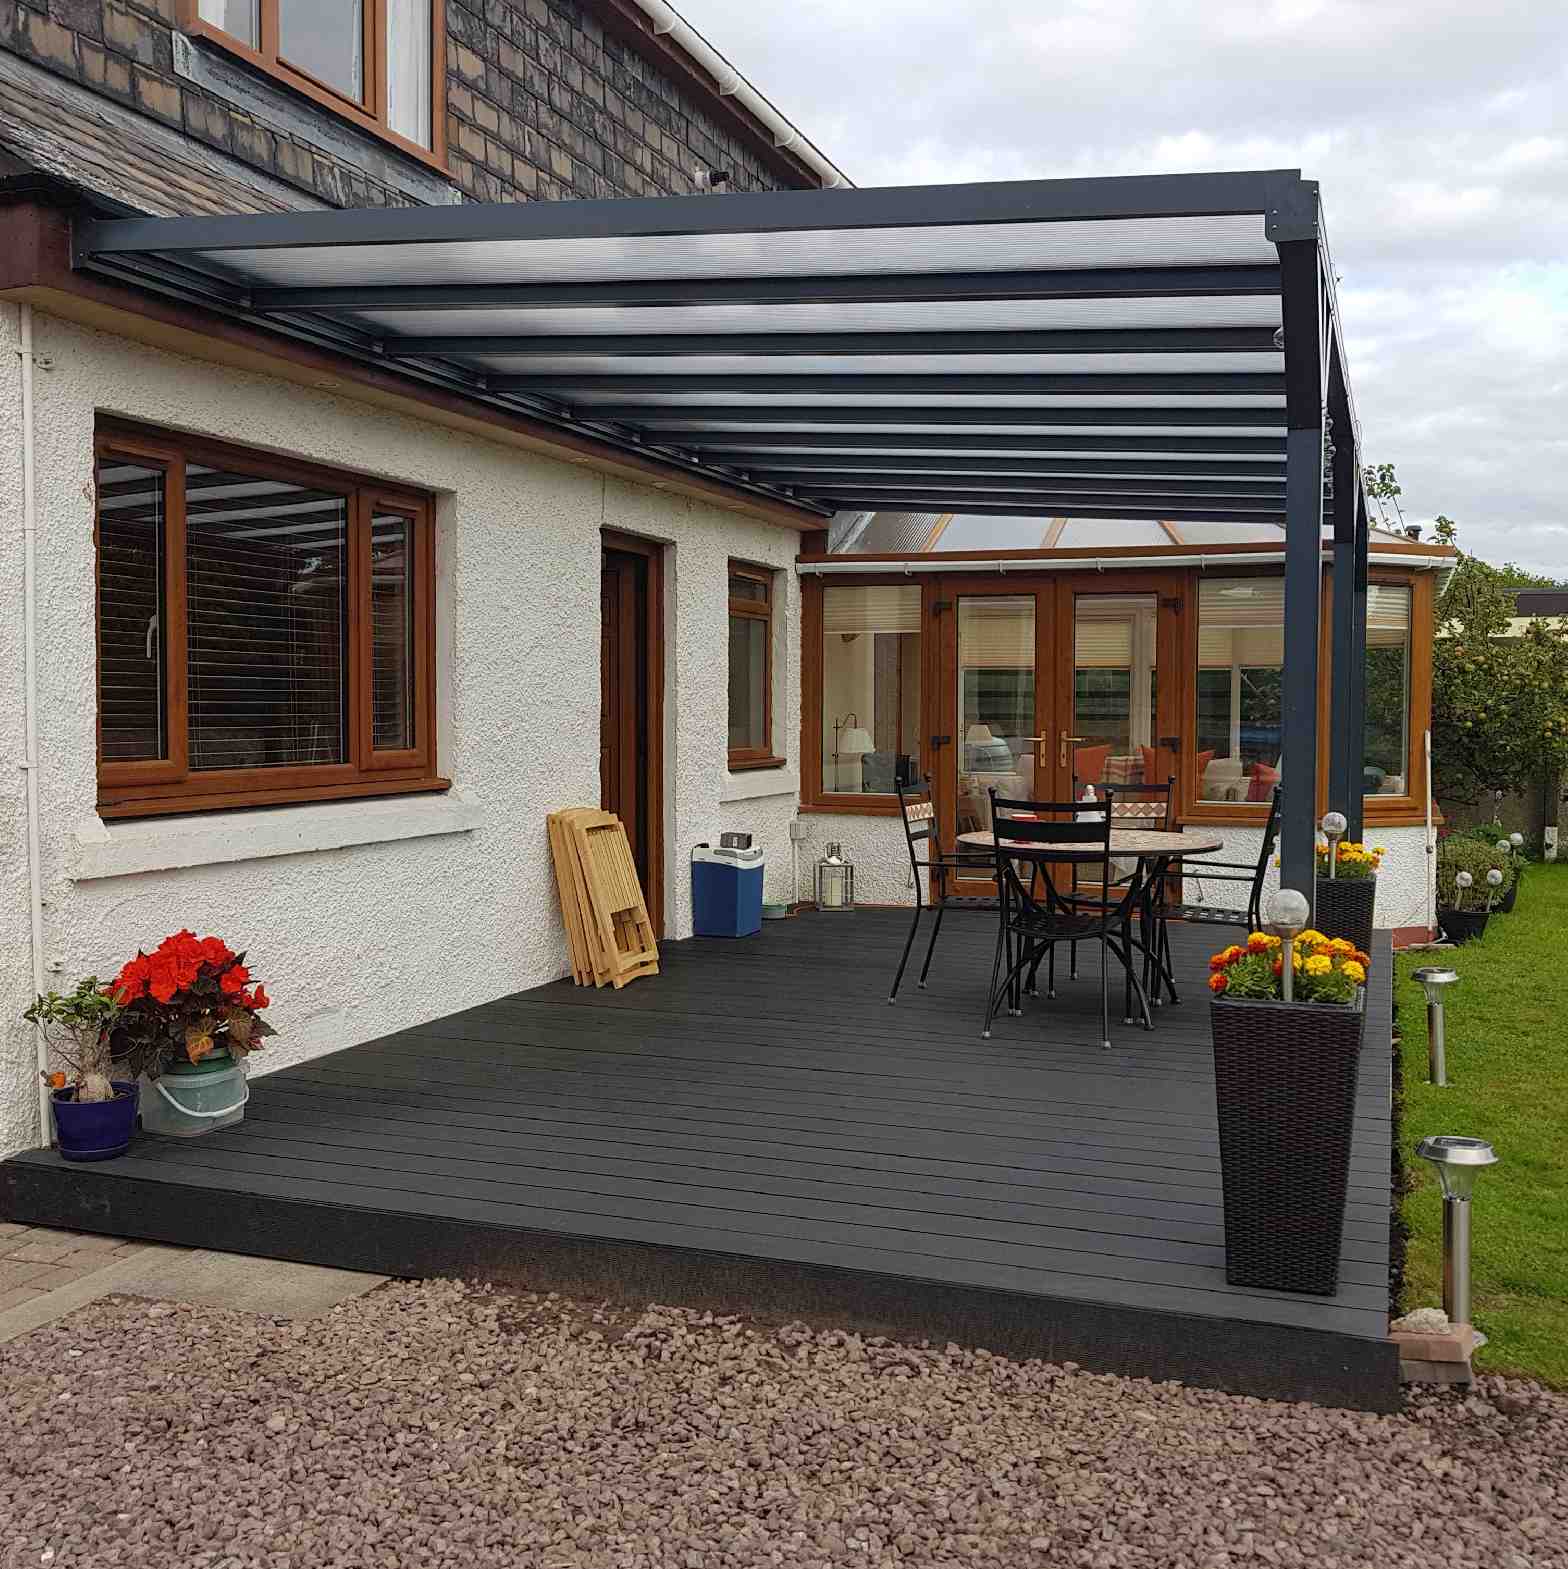 Buy Omega Verandah, Anthracite Grey, 16mm Polycarbonate Glazing - 3.5m (W) x 4.0m (P), (3) Supporting Posts online today